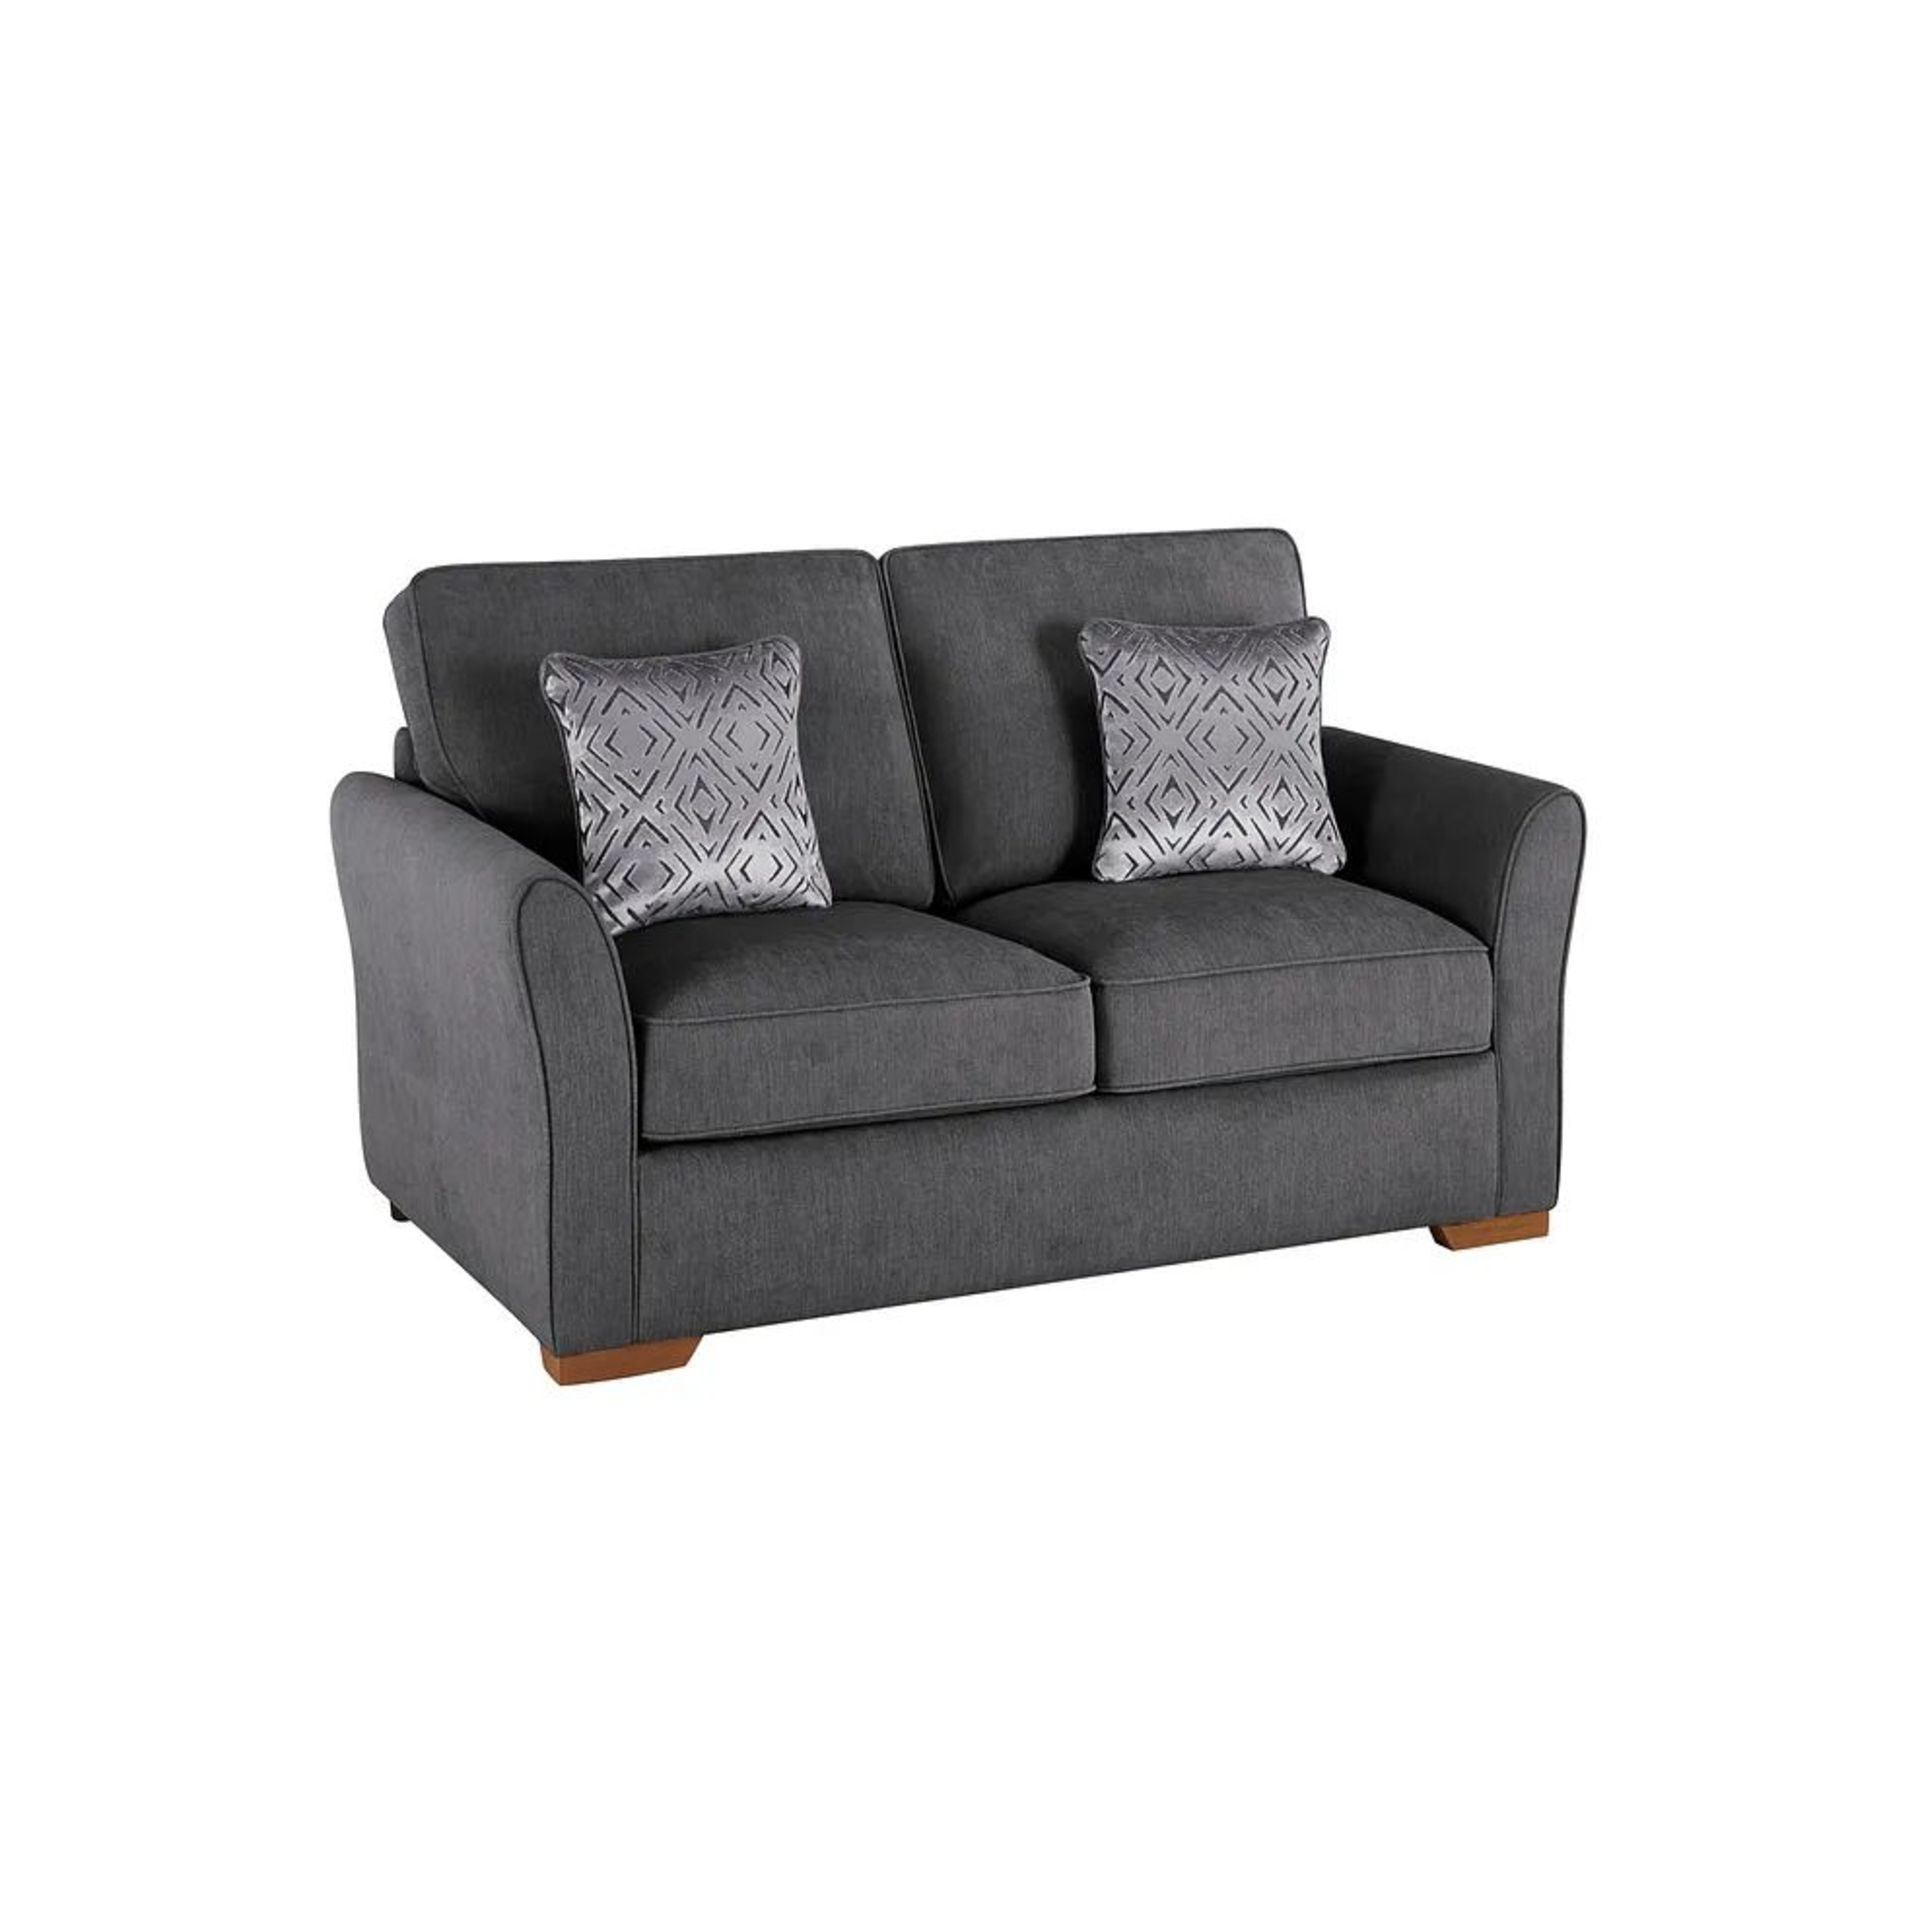 BRAND NEW JASMINE 2 Seater Sofa Bed - CAMPO PEWTER FABRIC. RRP £1099. Create a modern, multi-purpose - Image 2 of 12